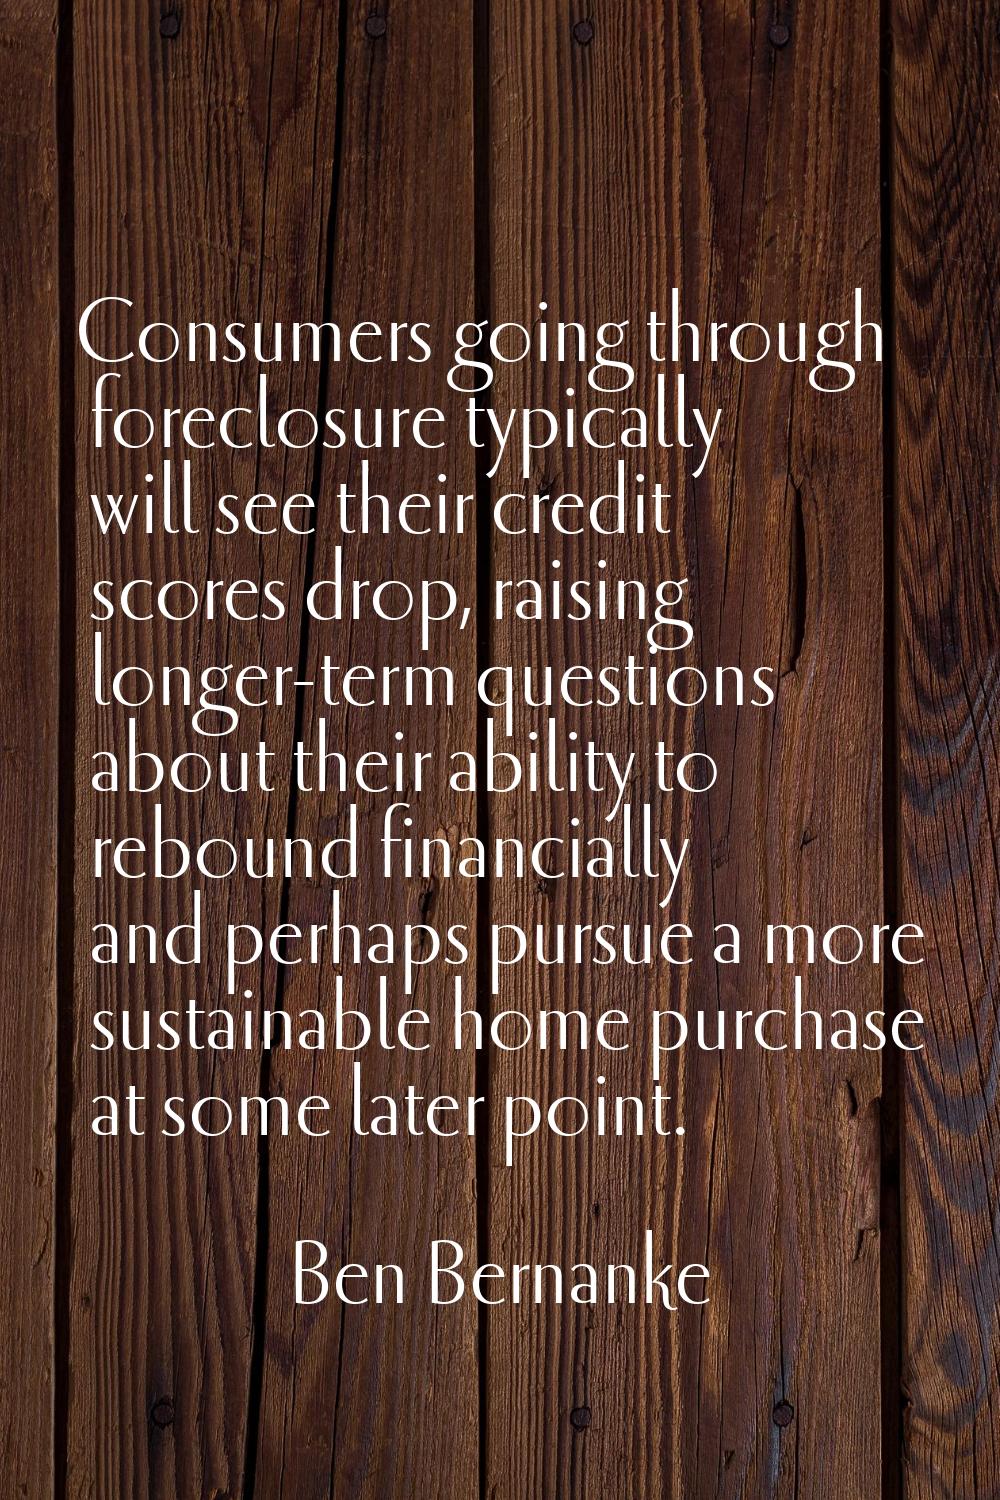 Consumers going through foreclosure typically will see their credit scores drop, raising longer-ter